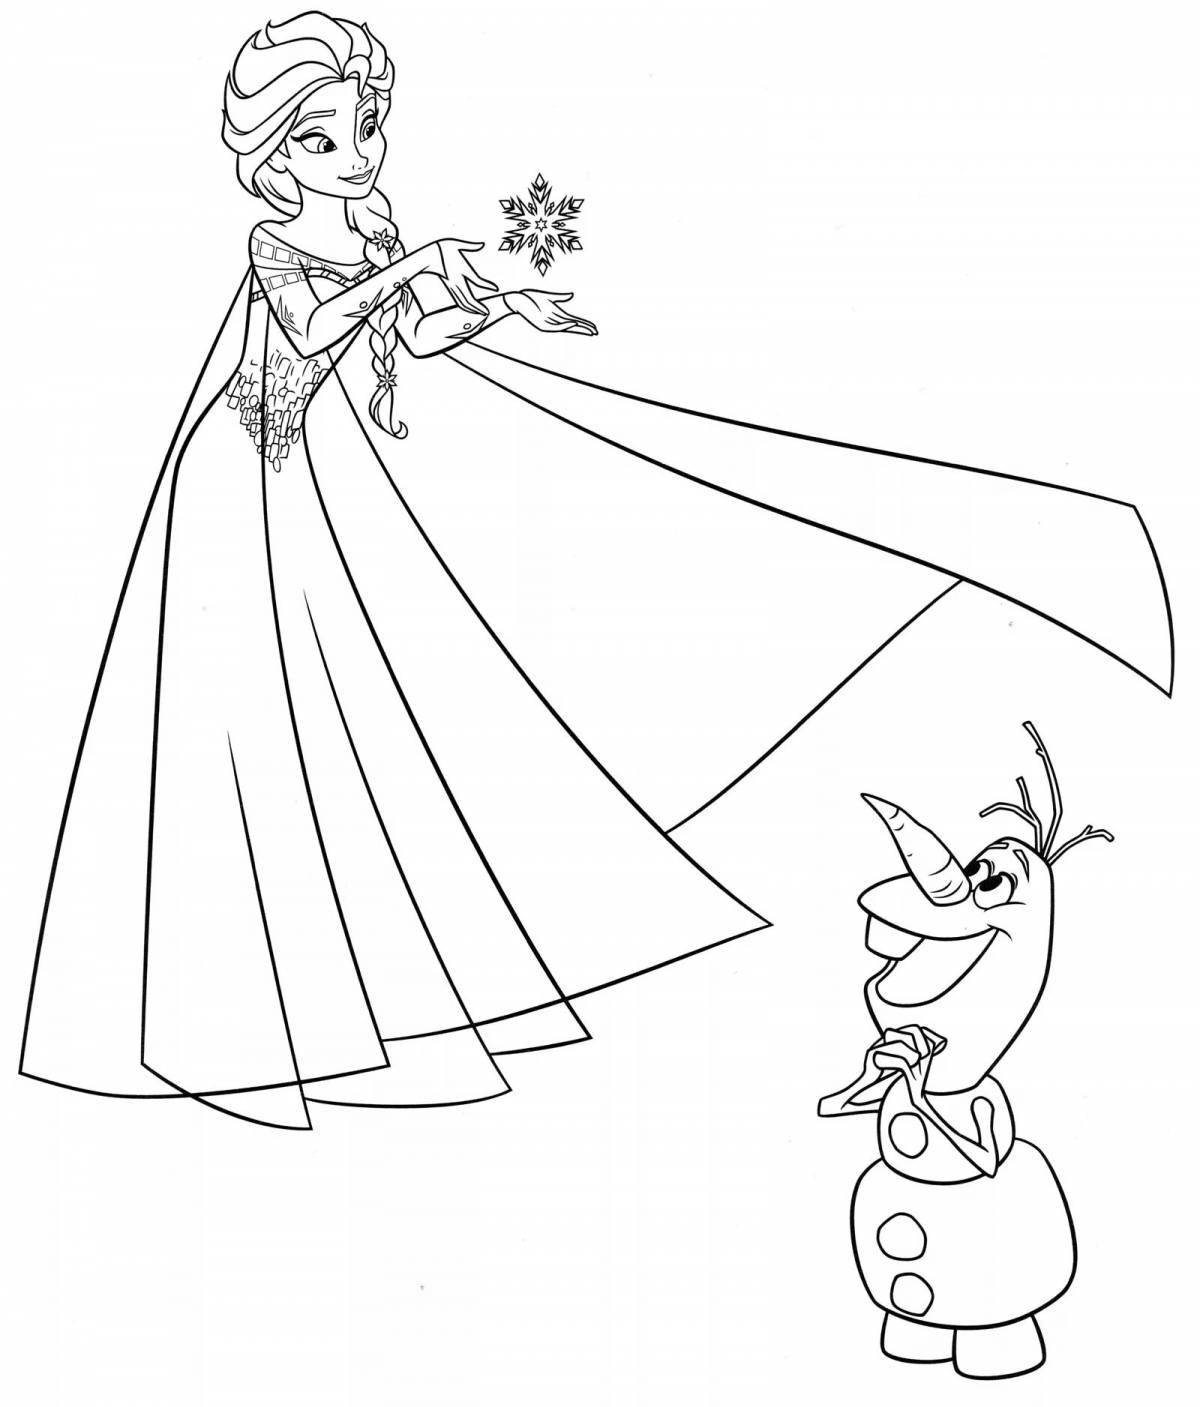 Fabulous anna and olaf coloring